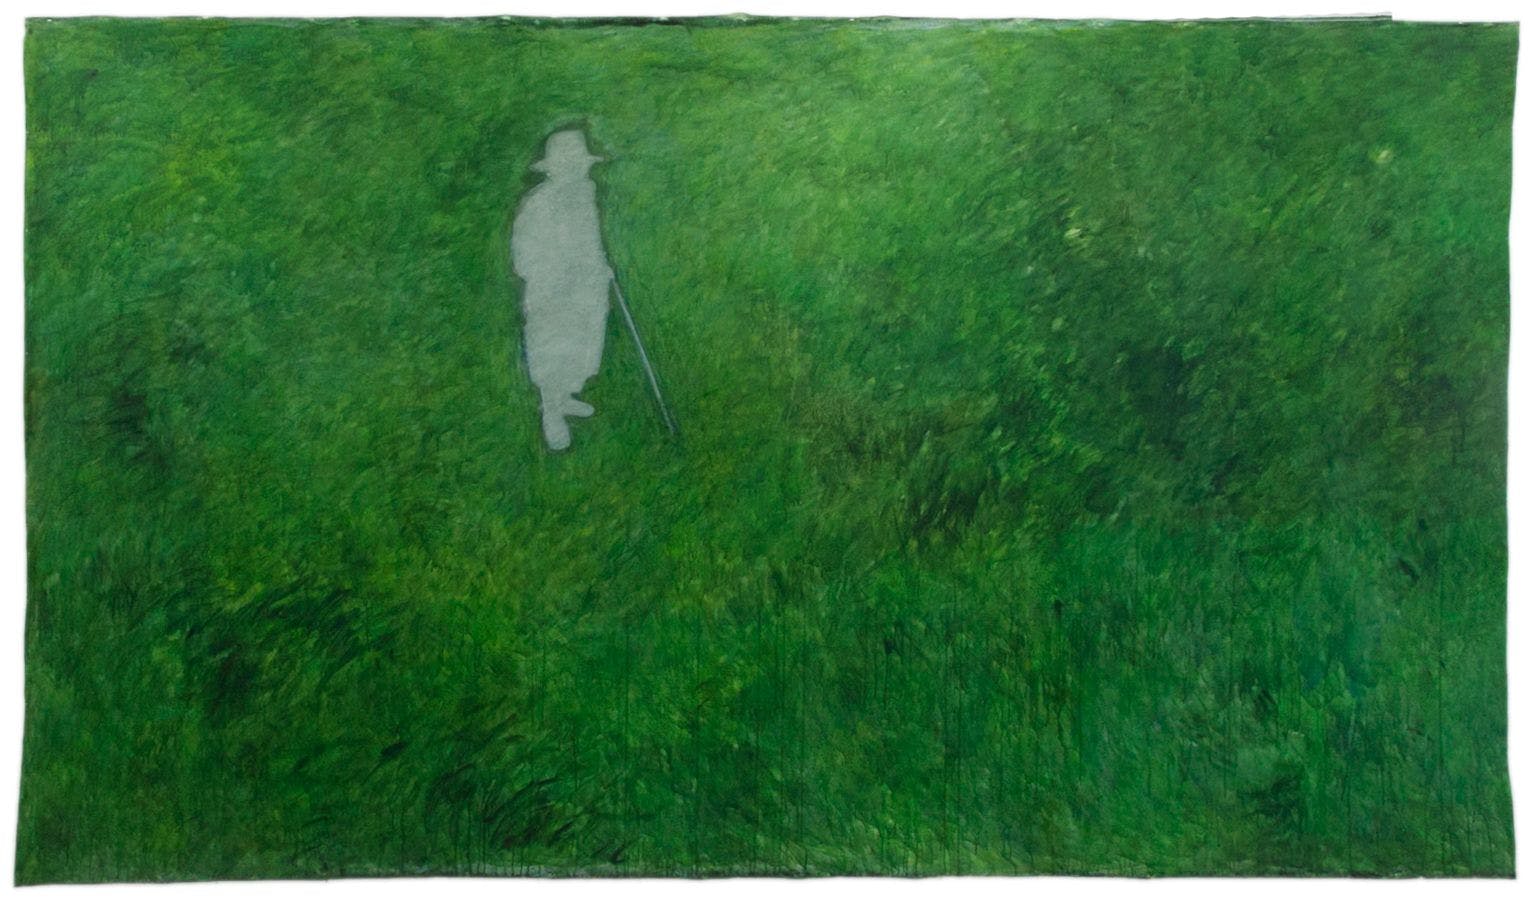 May Stevens, Green Field, 1989. (c) May Stevens; Courtesy of the estate of the artist and RYAN LEE Gallery, New York.